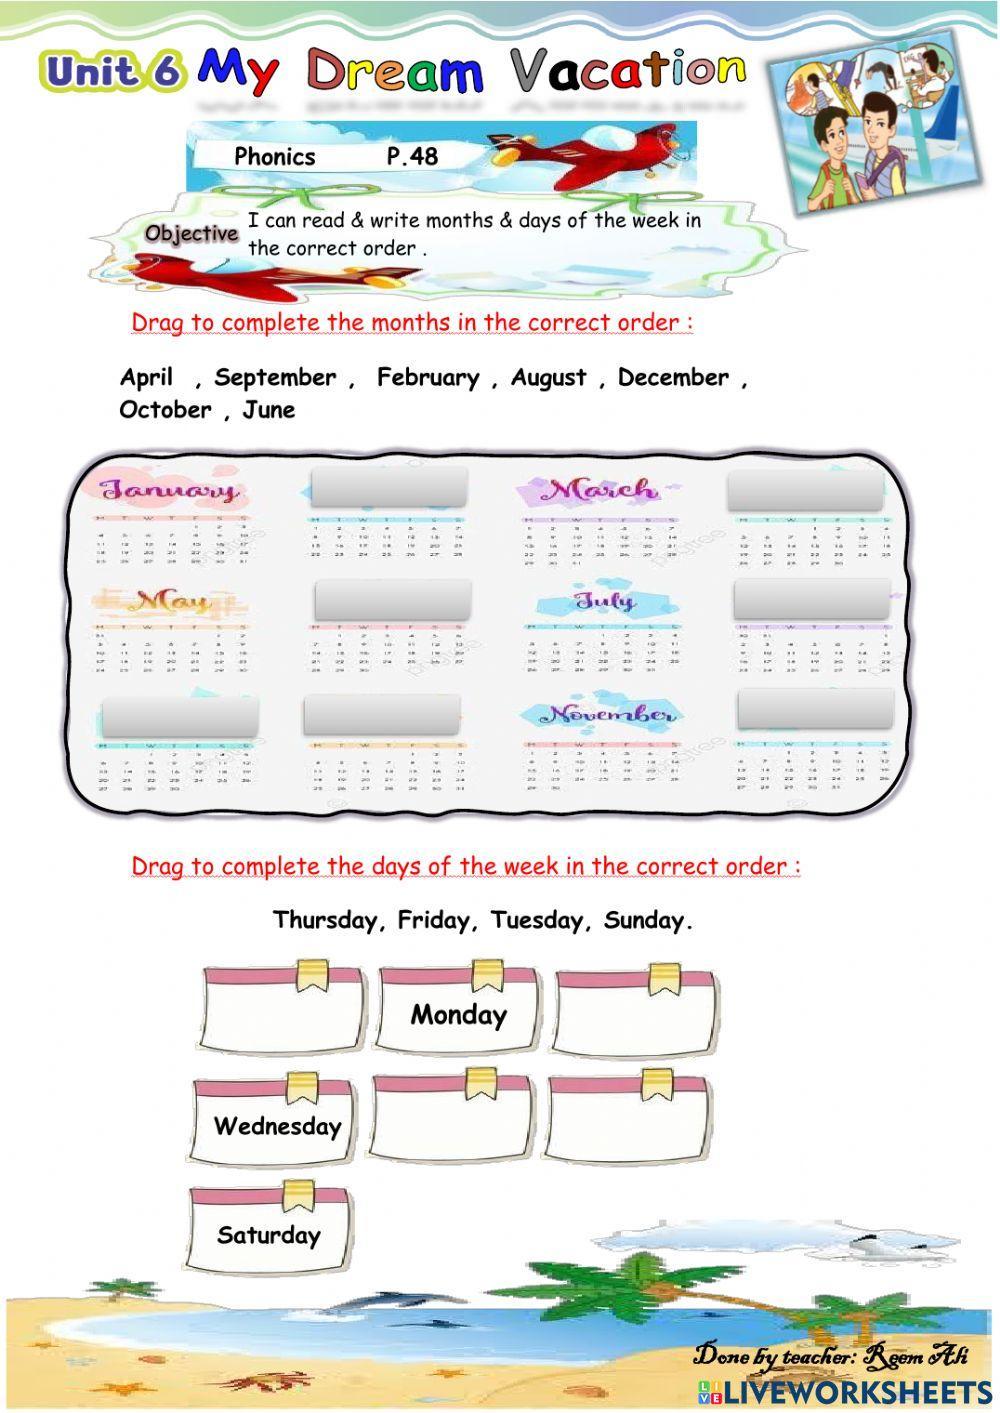 We Can6 U6 L4  I can read & write months & days of the week in the correct order